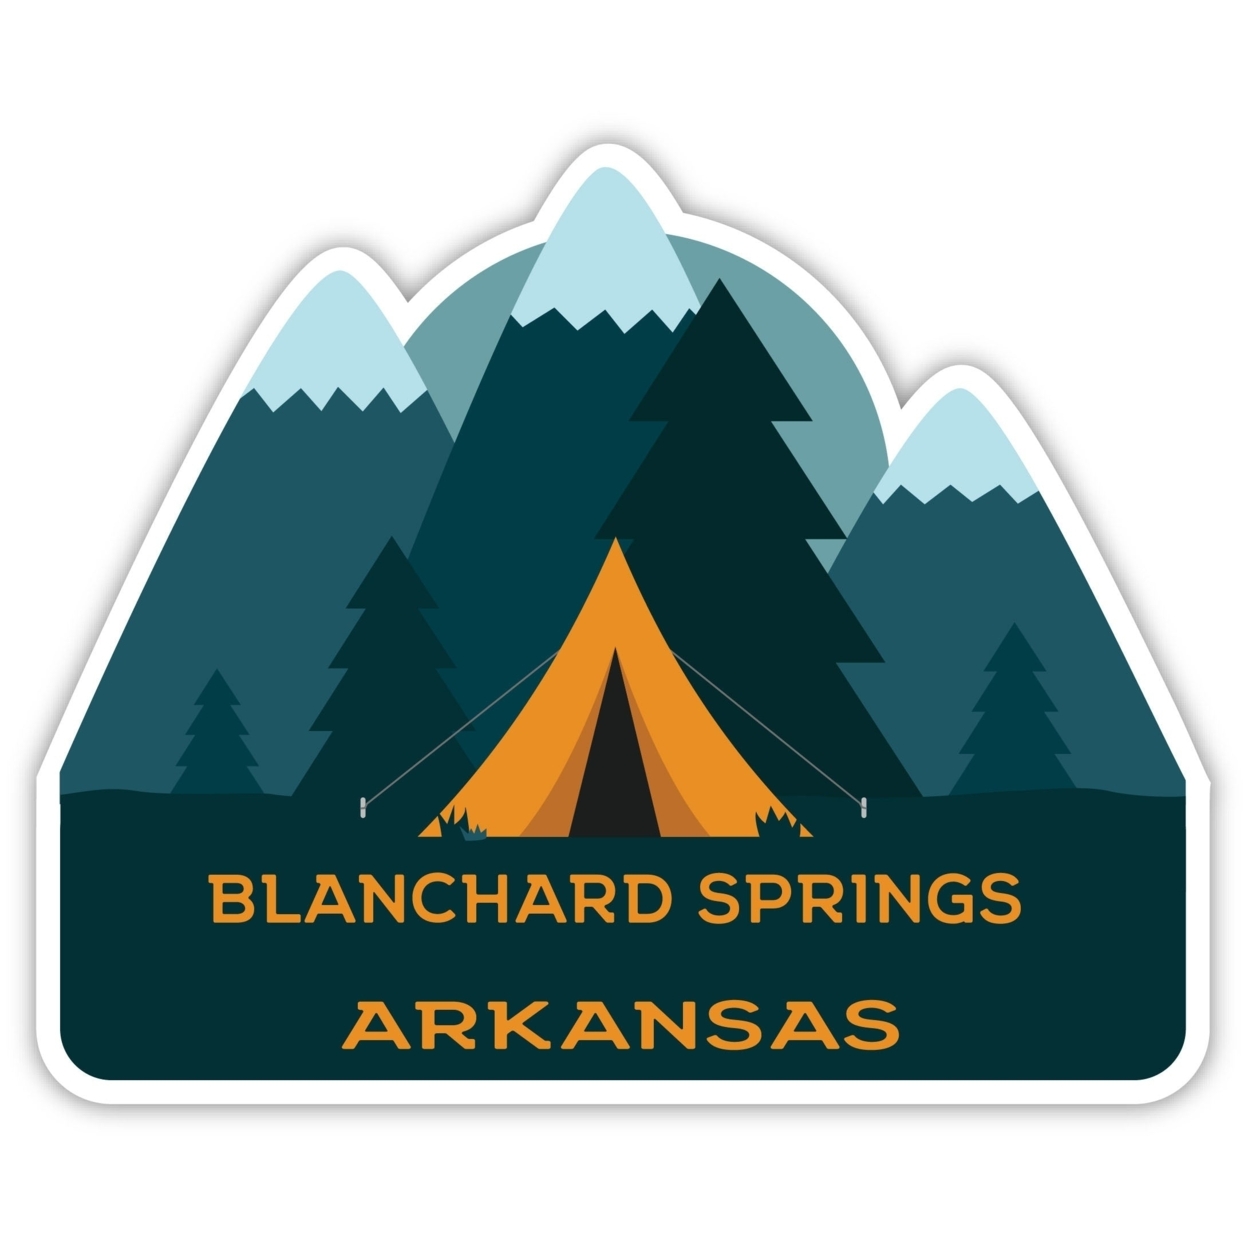 Blanchard Springs Arkansas Souvenir Decorative Stickers (Choose Theme And Size) - 4-Pack, 4-Inch, Tent